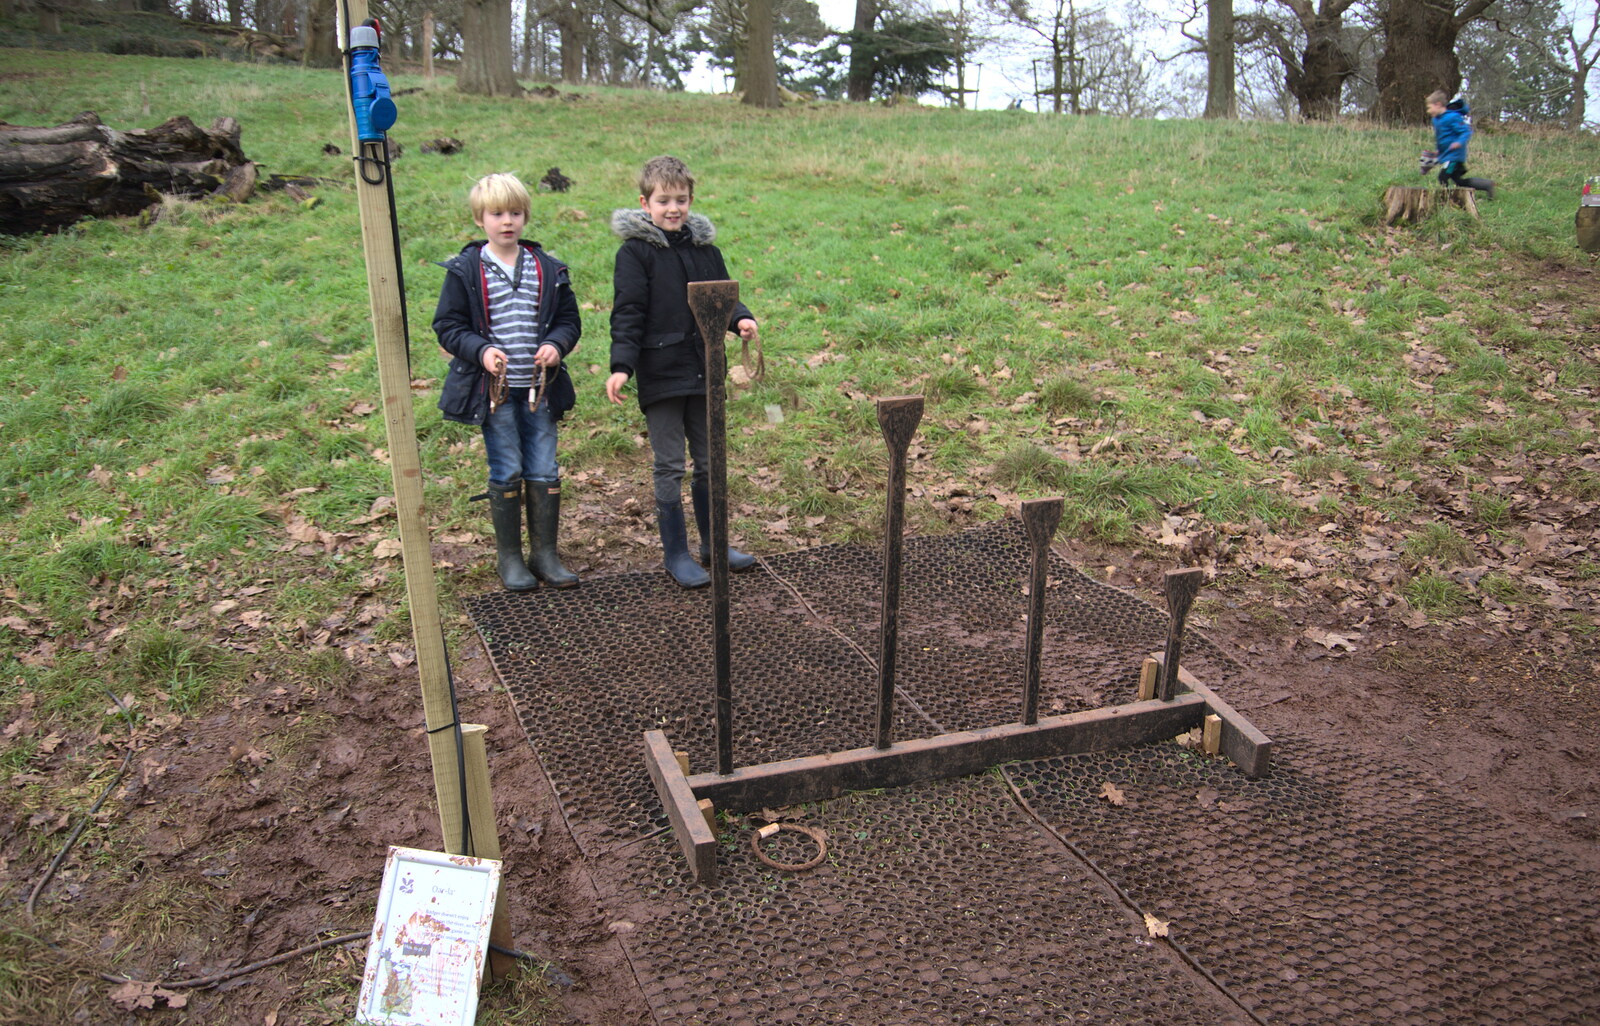 Fred has a go at quoits from Killerton House, Broadclyst, Devon - 30th December 2017